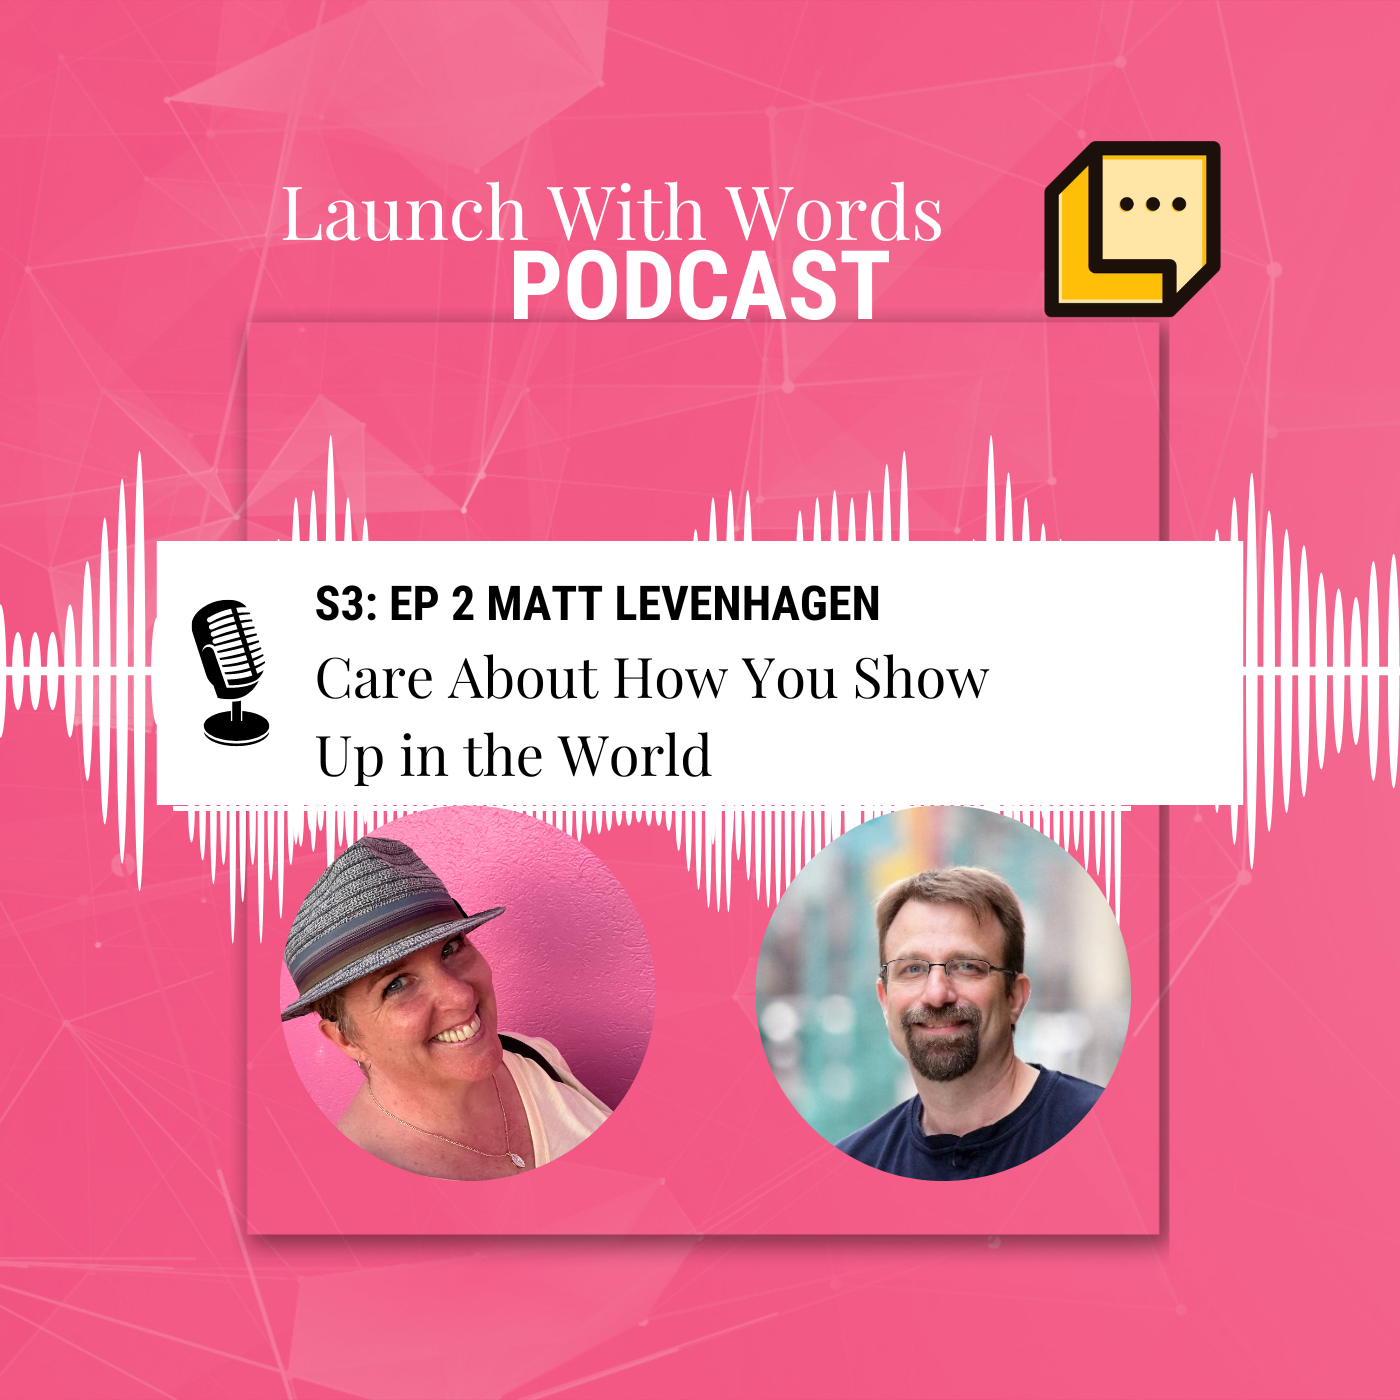 LWW S3 Ep1 Matt Levenhagen -- Care About How You Show Up in the World